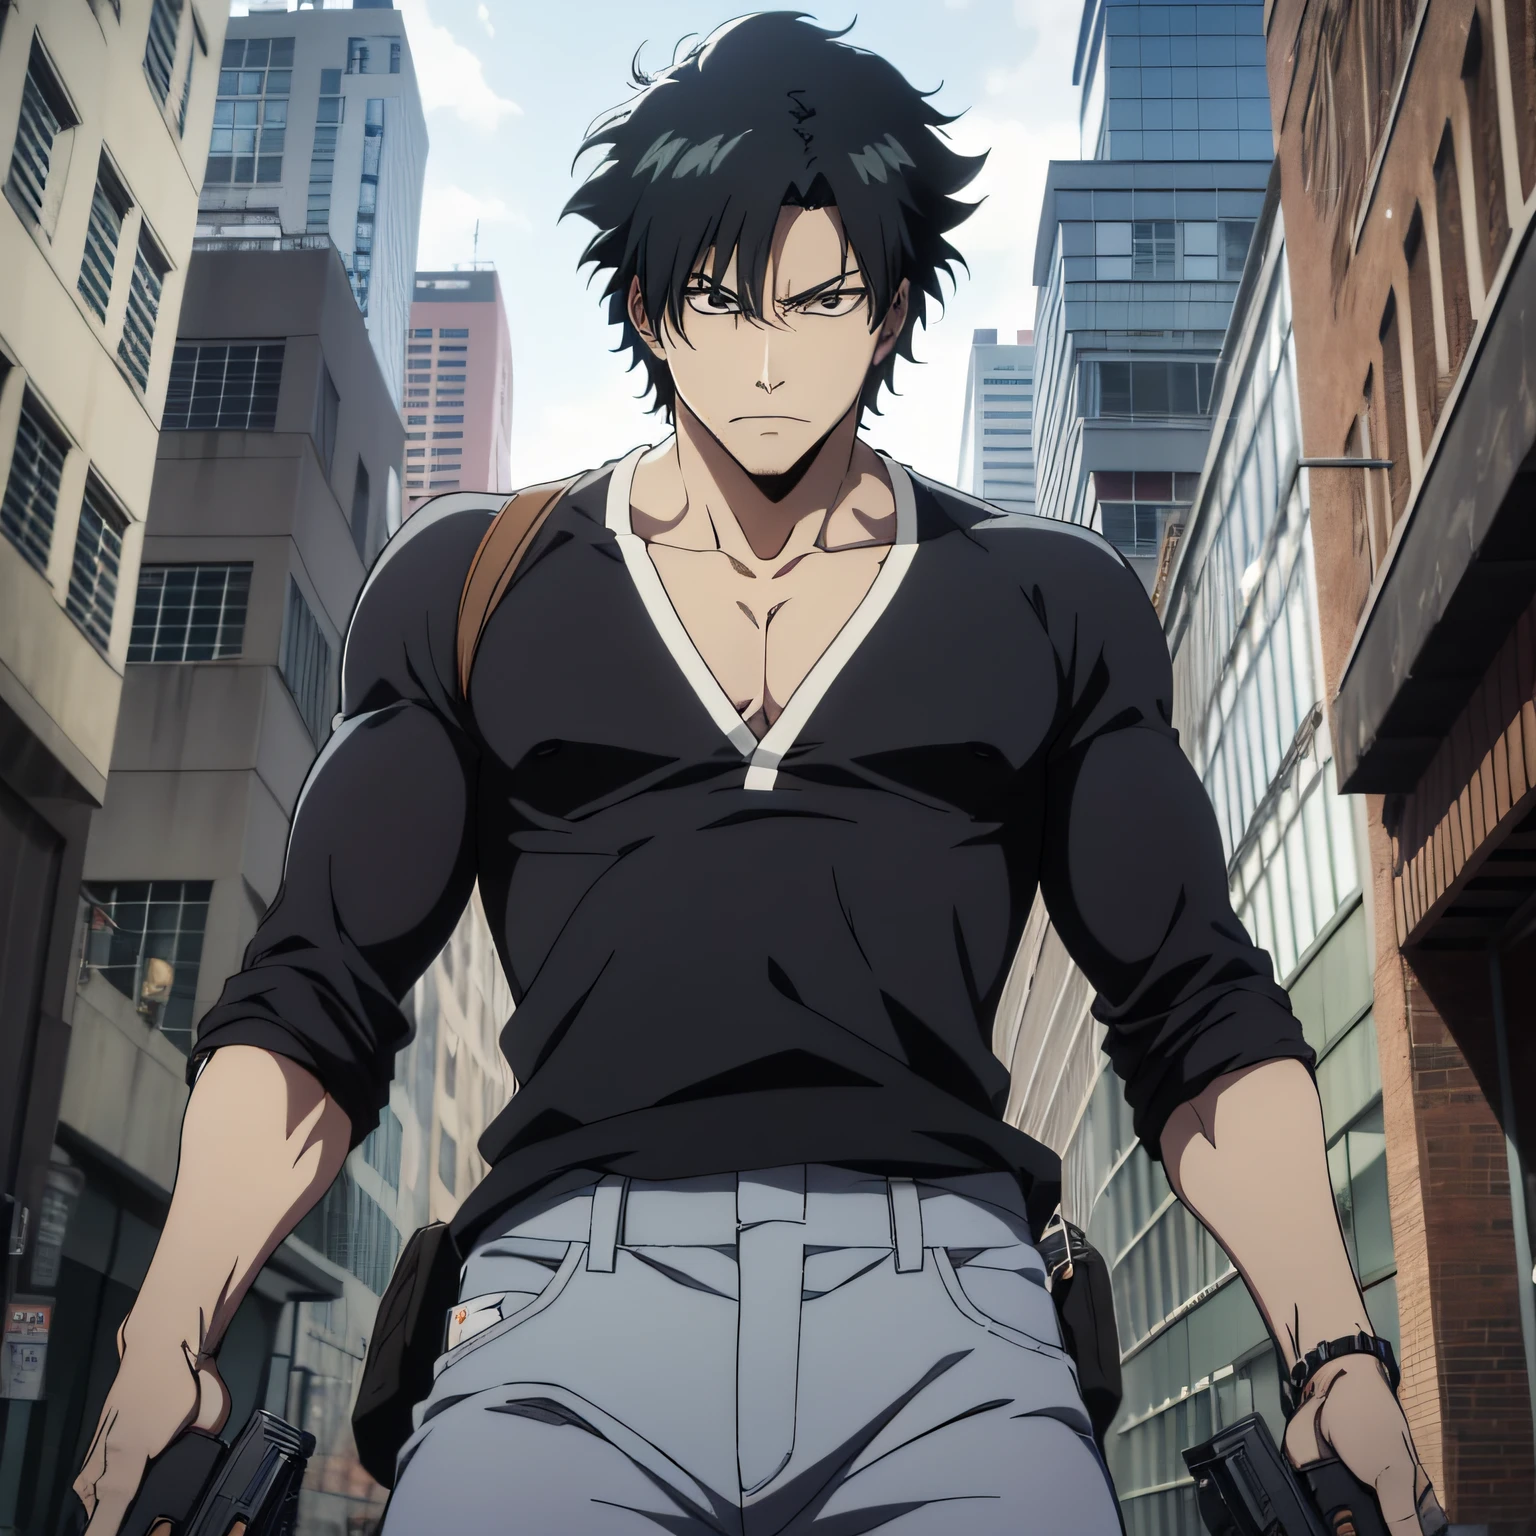 a man holding a gun near a building, tall and very muscular, short black hair, wearing tight black shirt and gray pants, with insane smile, cruel expression, male anime character, trigger anime artstyle, as an anime character, dark anime style, kentaro miura manga style, hijikata toushirou of gintama, baki style, kentaro miura manga art style, Shonen shuushuu anime image, Epic anime style, cinematic lighthing, Epic composition, face detailed, detailedeyes, extremely detaild.